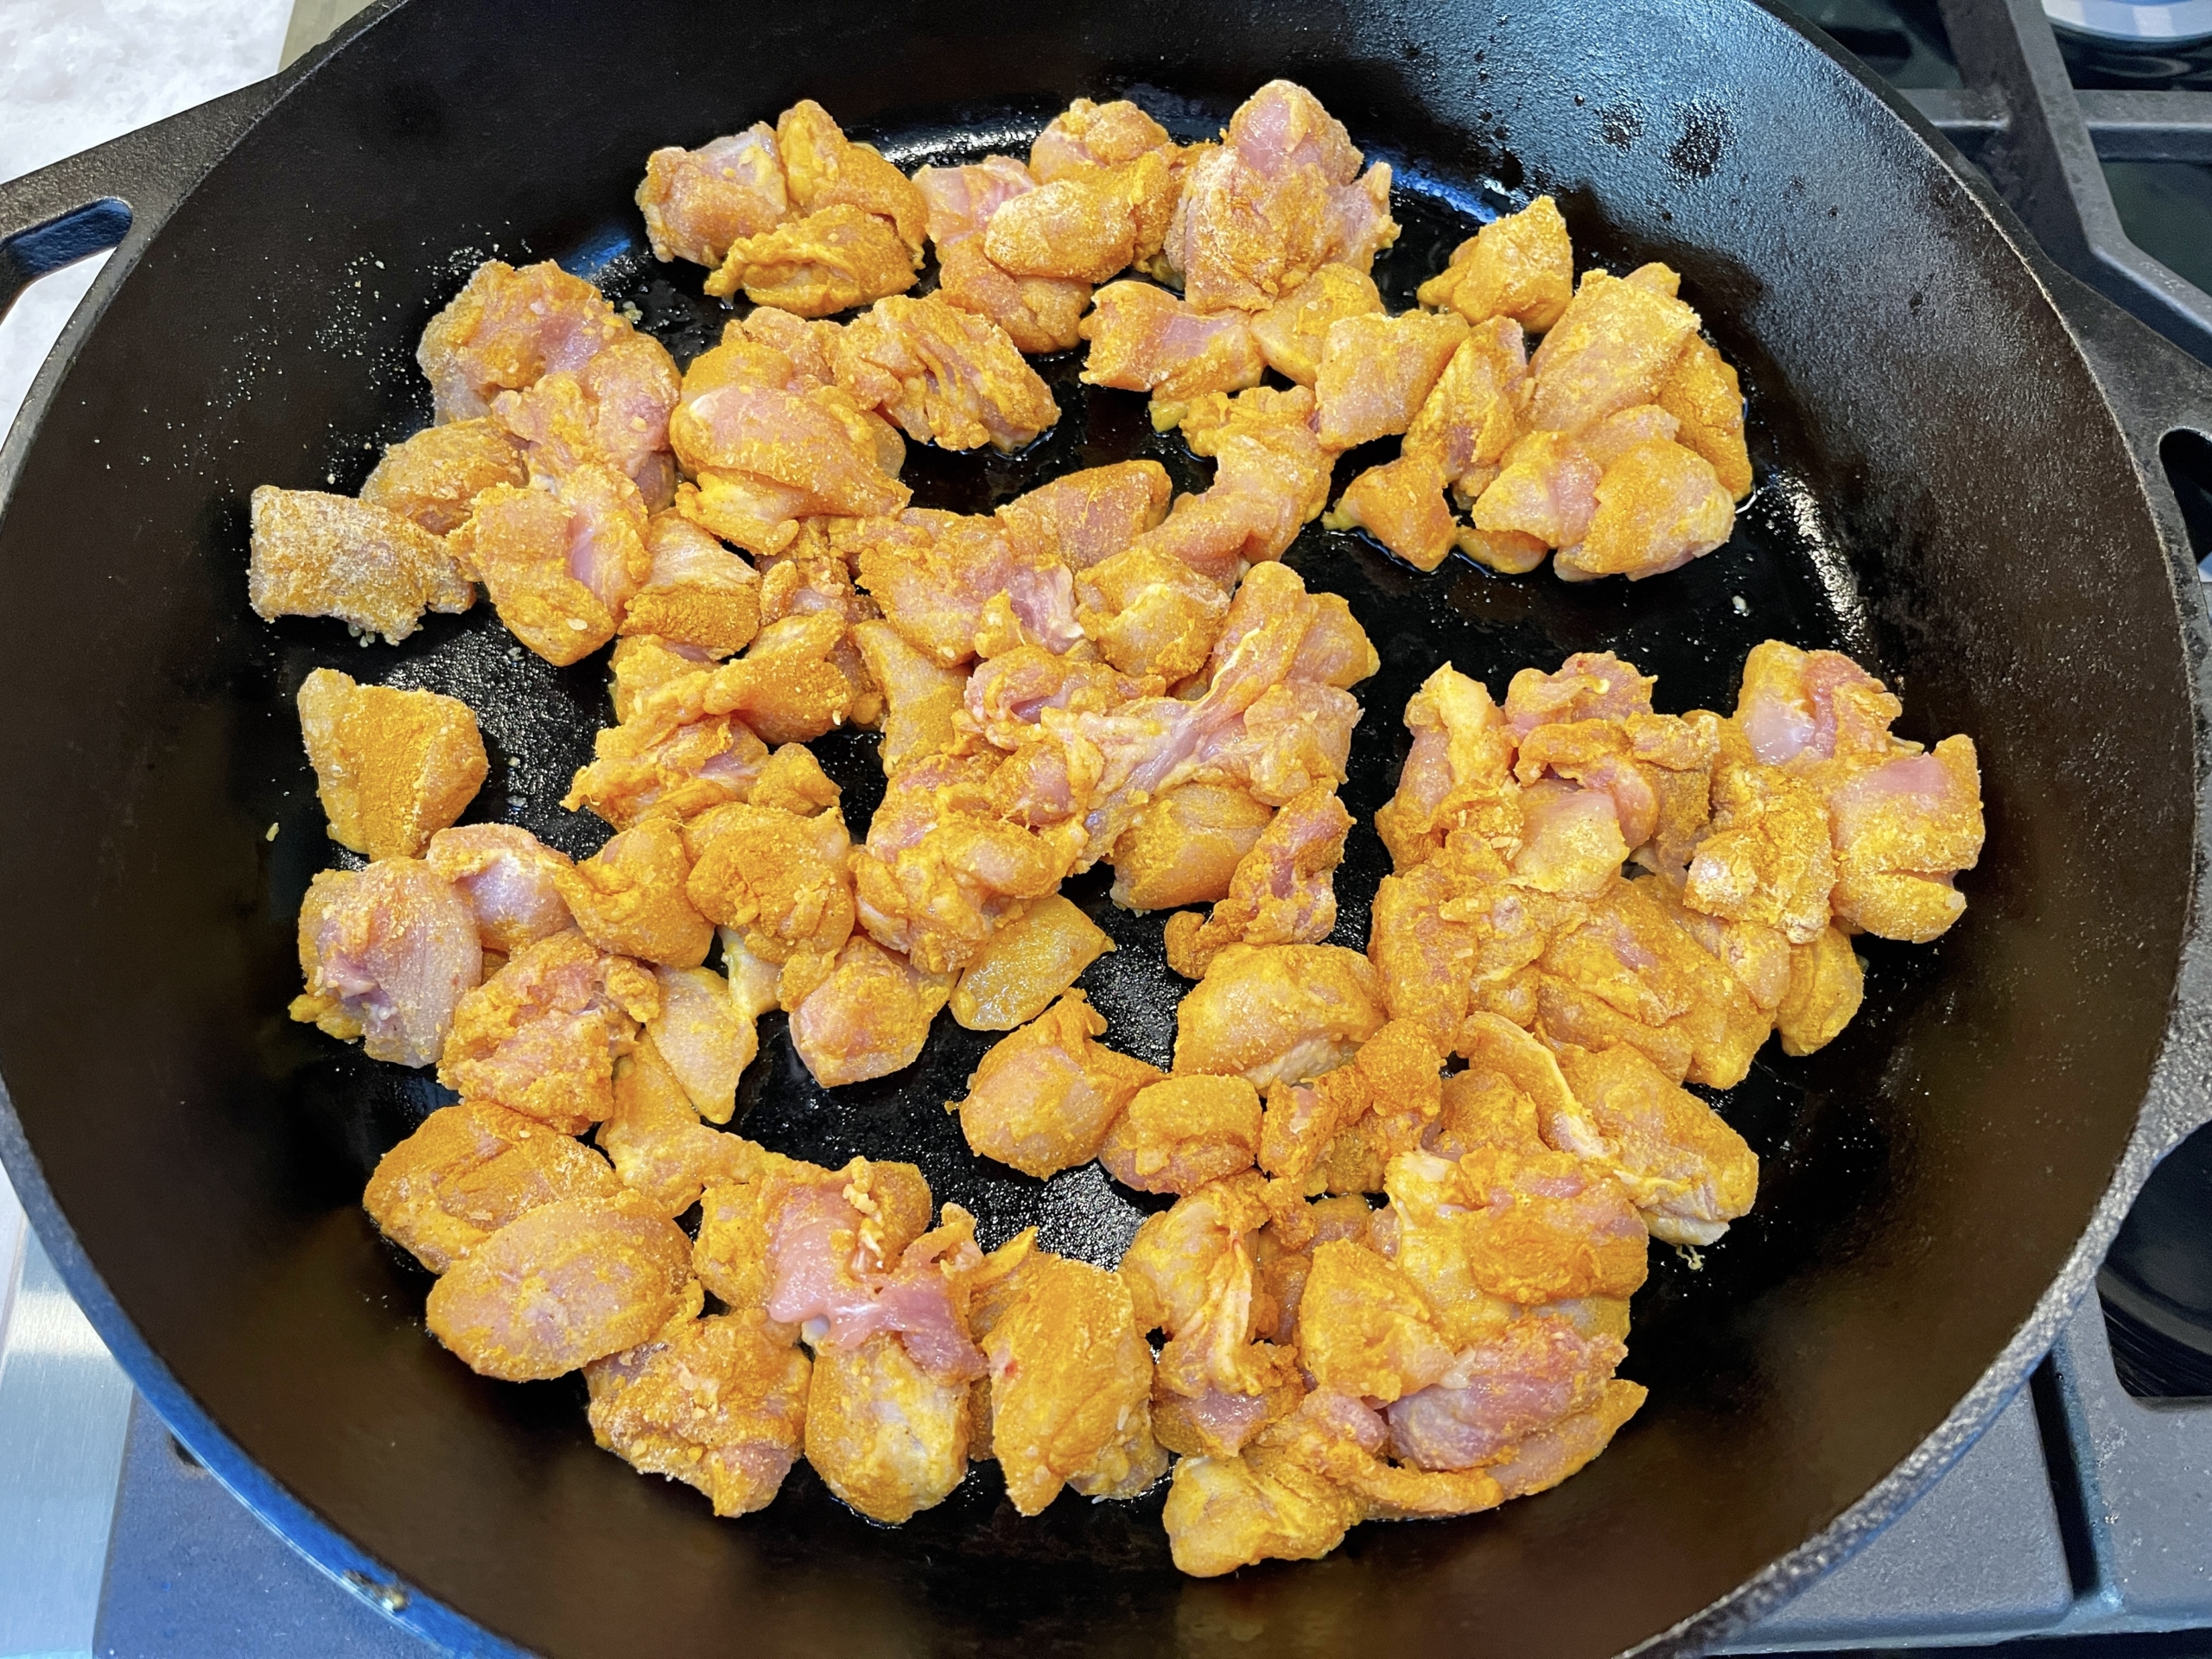 Cook turmeric chicken for 4 mins.